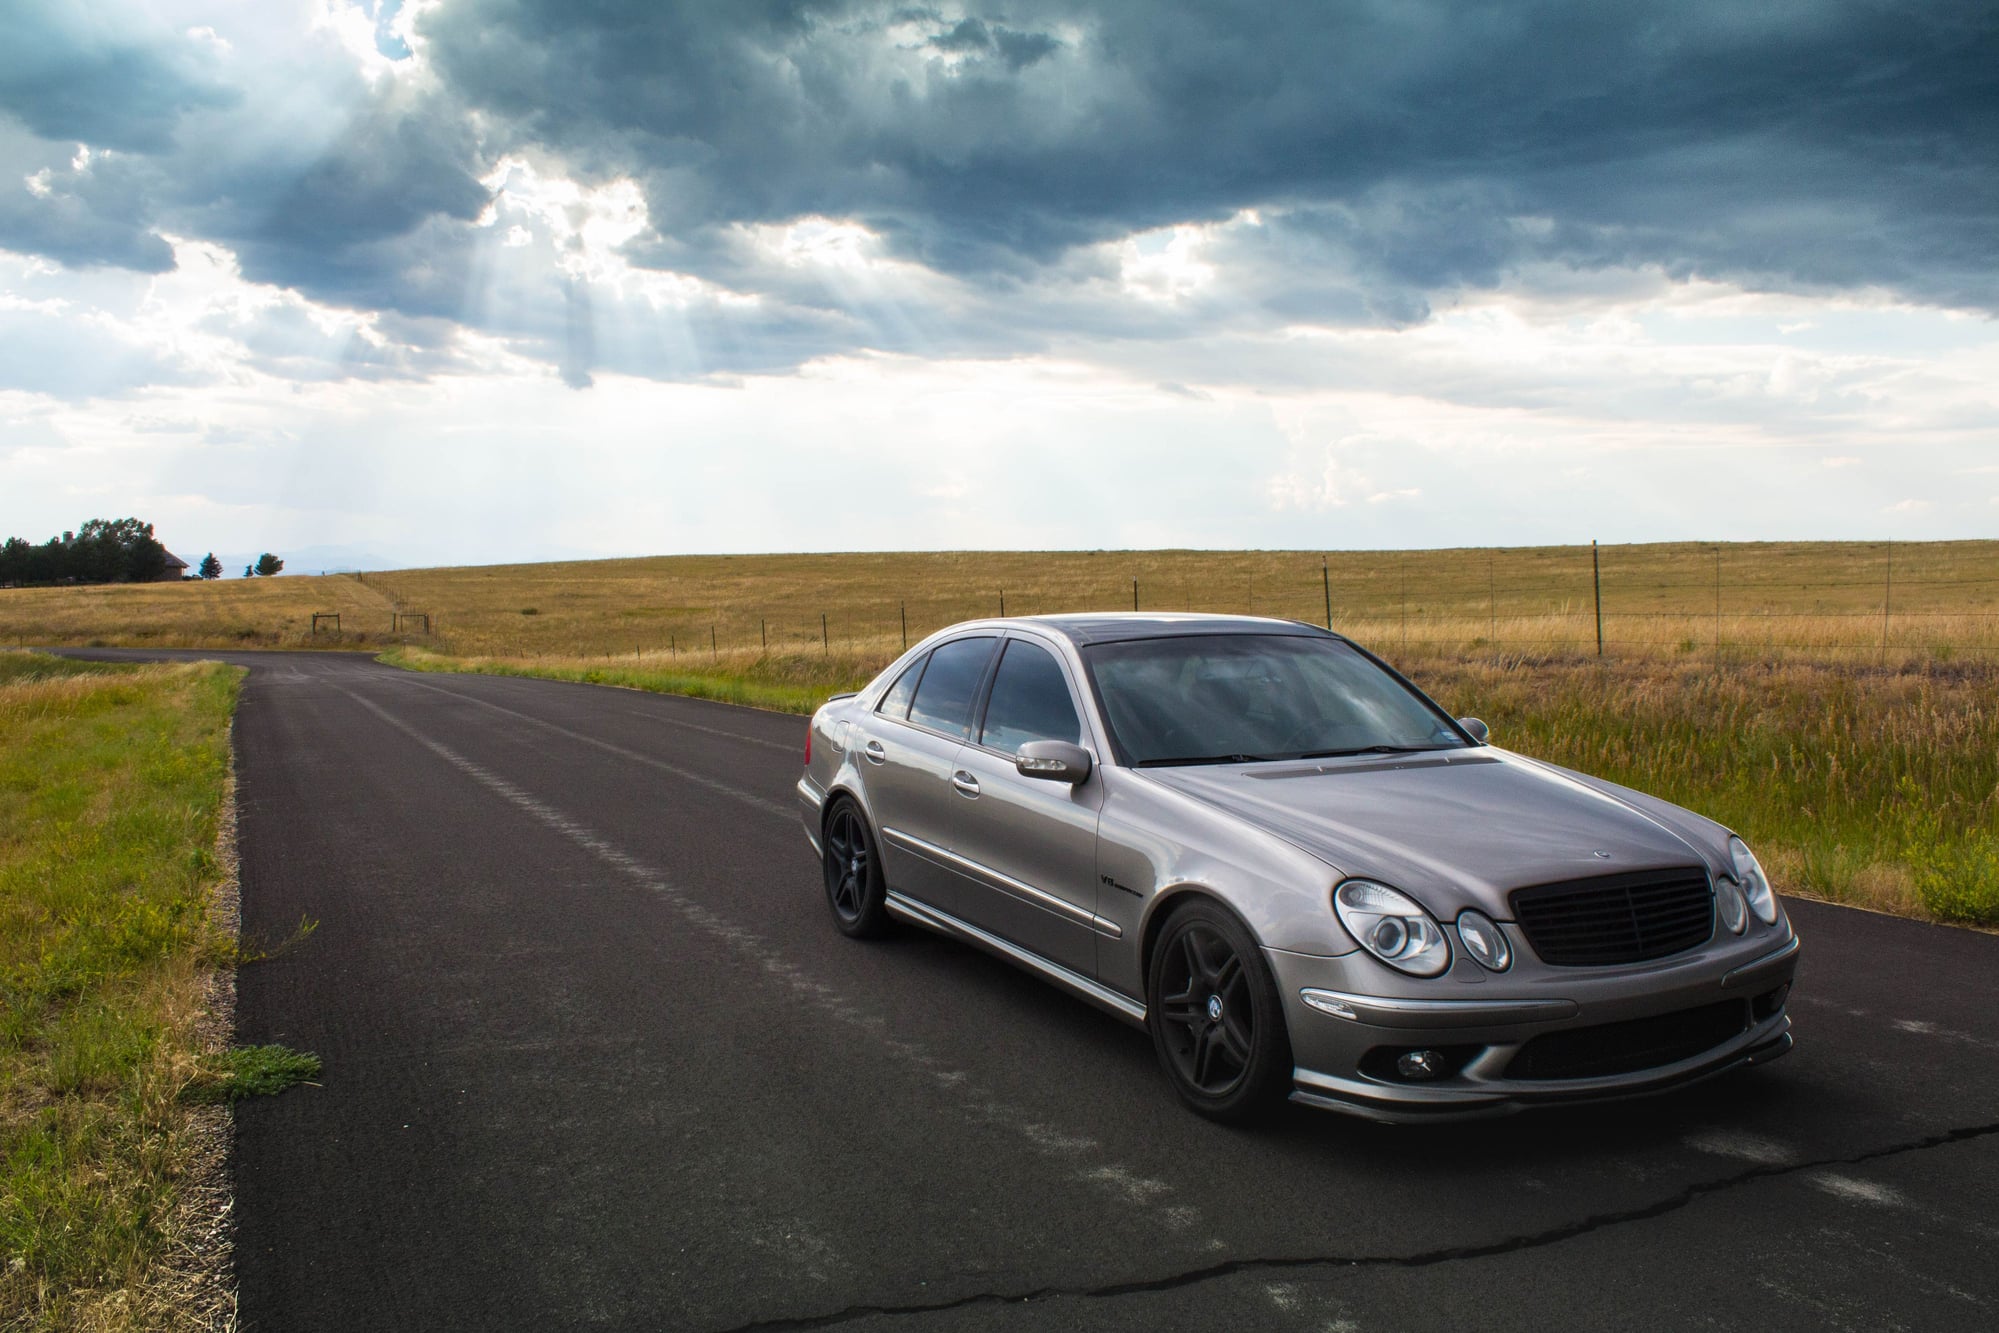 2006 Mercedes-Benz E55 AMG - 2006 E55 AMG 58k Miles - Used - VIN WDBUF76J66A860561 - 60,029 Miles - 8 cyl - 2WD - Automatic - Sedan - Denver, CO 80111, United States